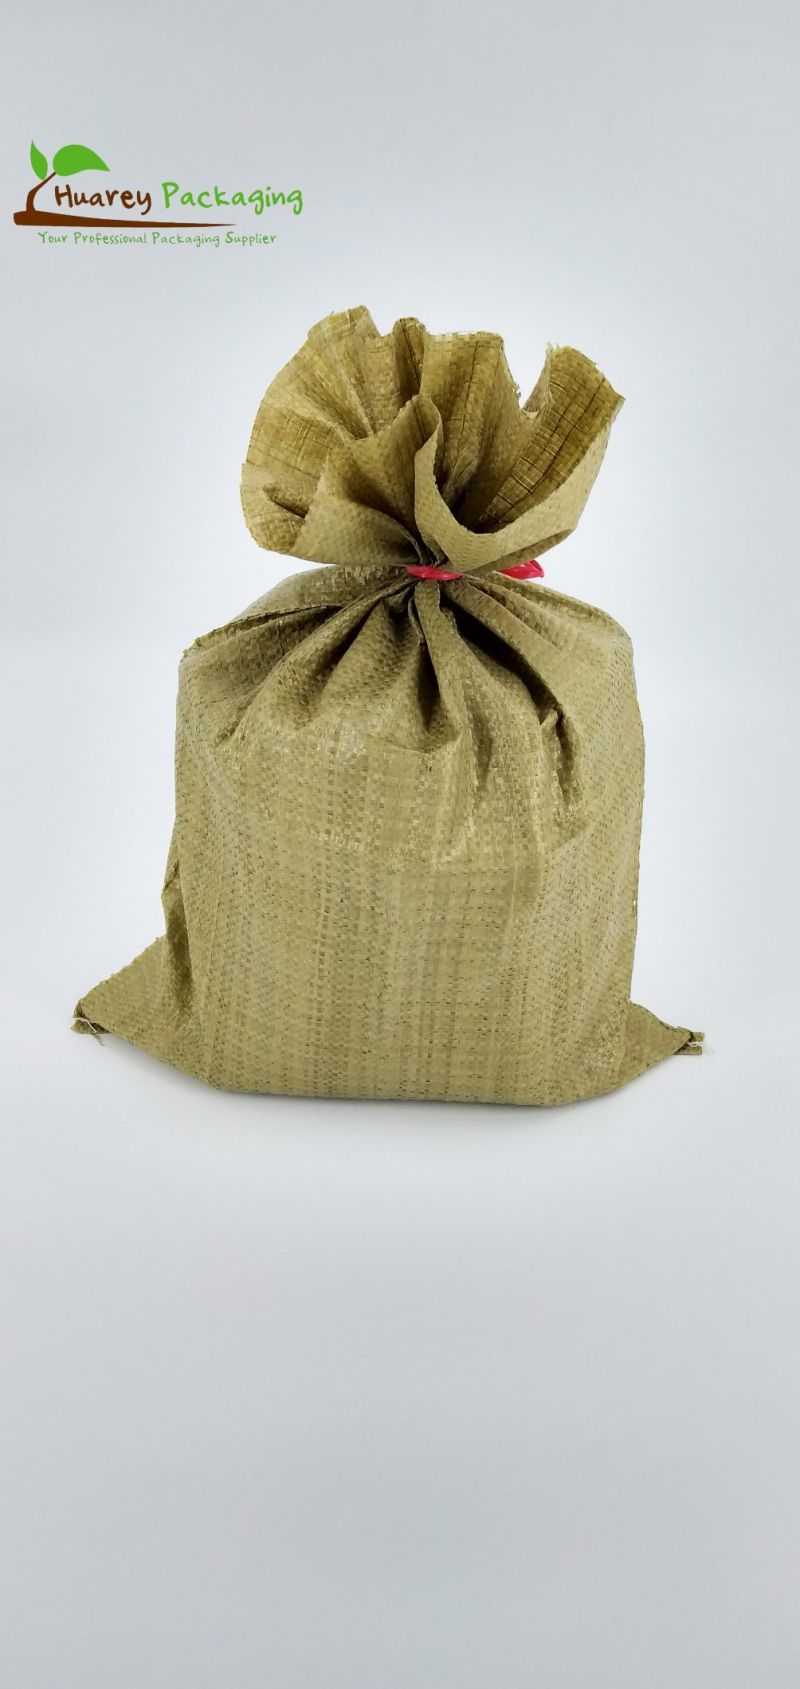 PP Woven Bags/Sacks for Packaging Construction Waste, Building Garbage, Sand, Feed